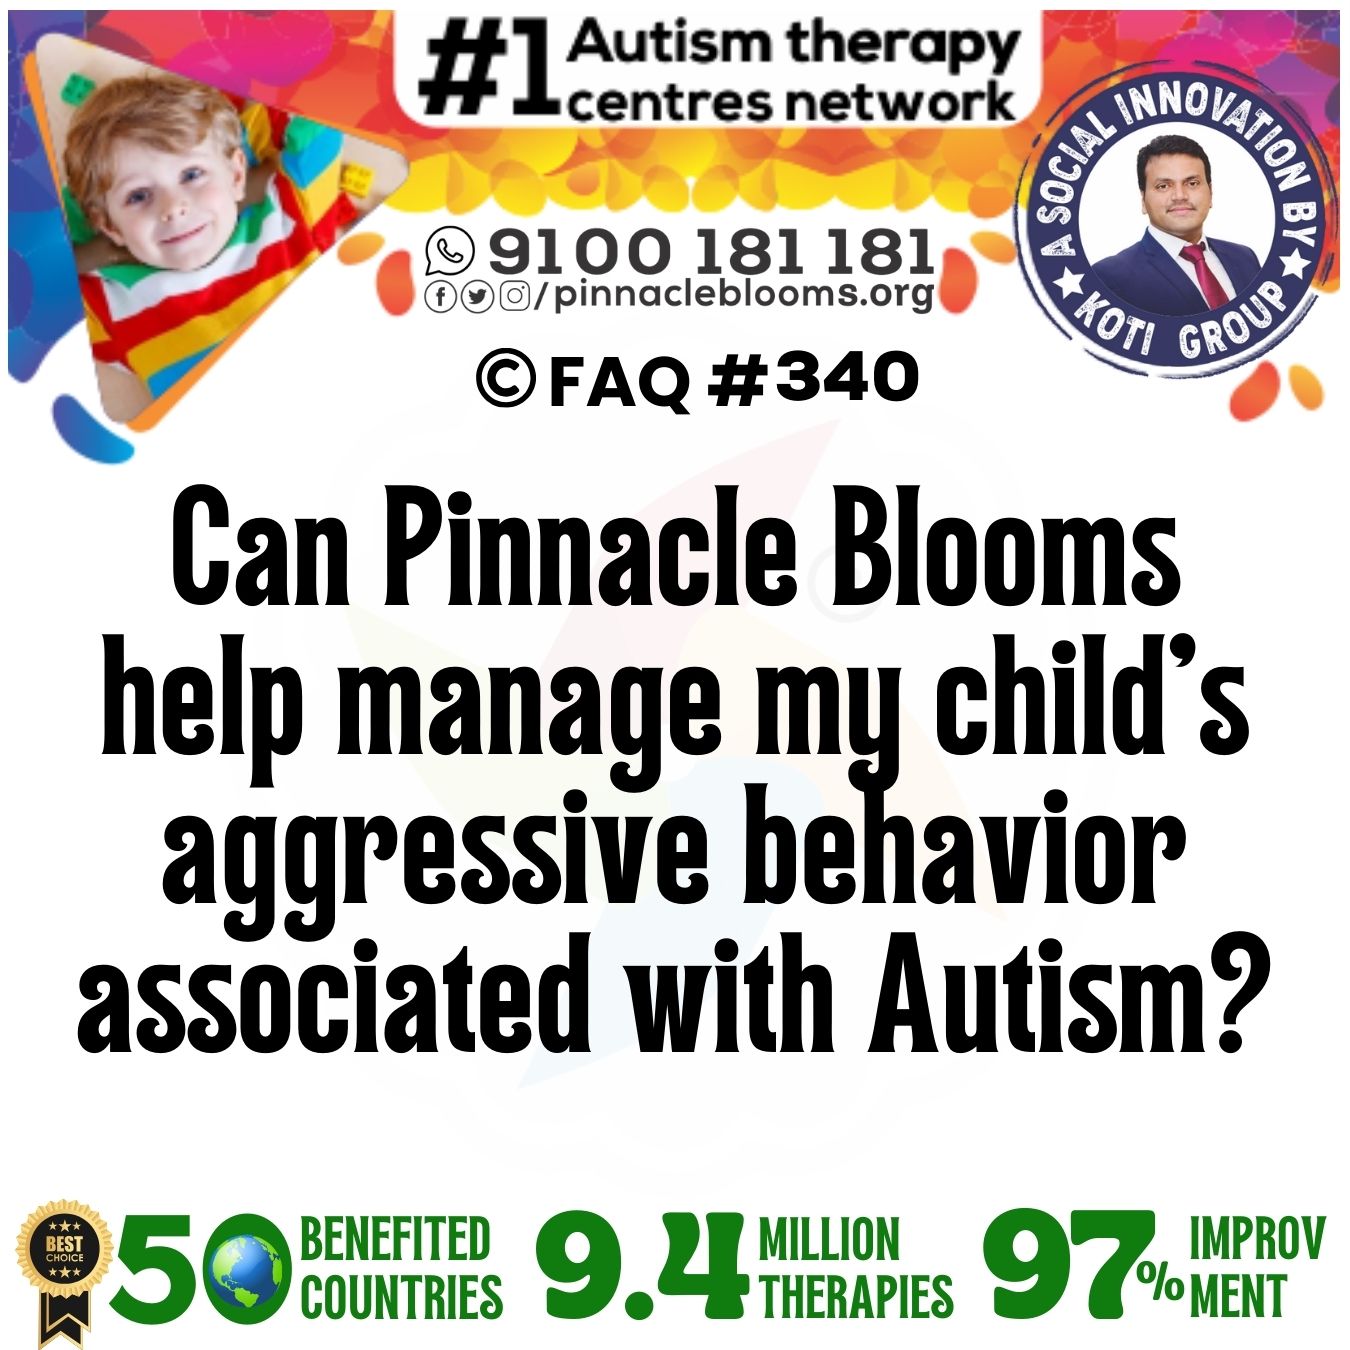 Can Pinnacle Blooms help manage my child's aggressive behavior associated with Autism?